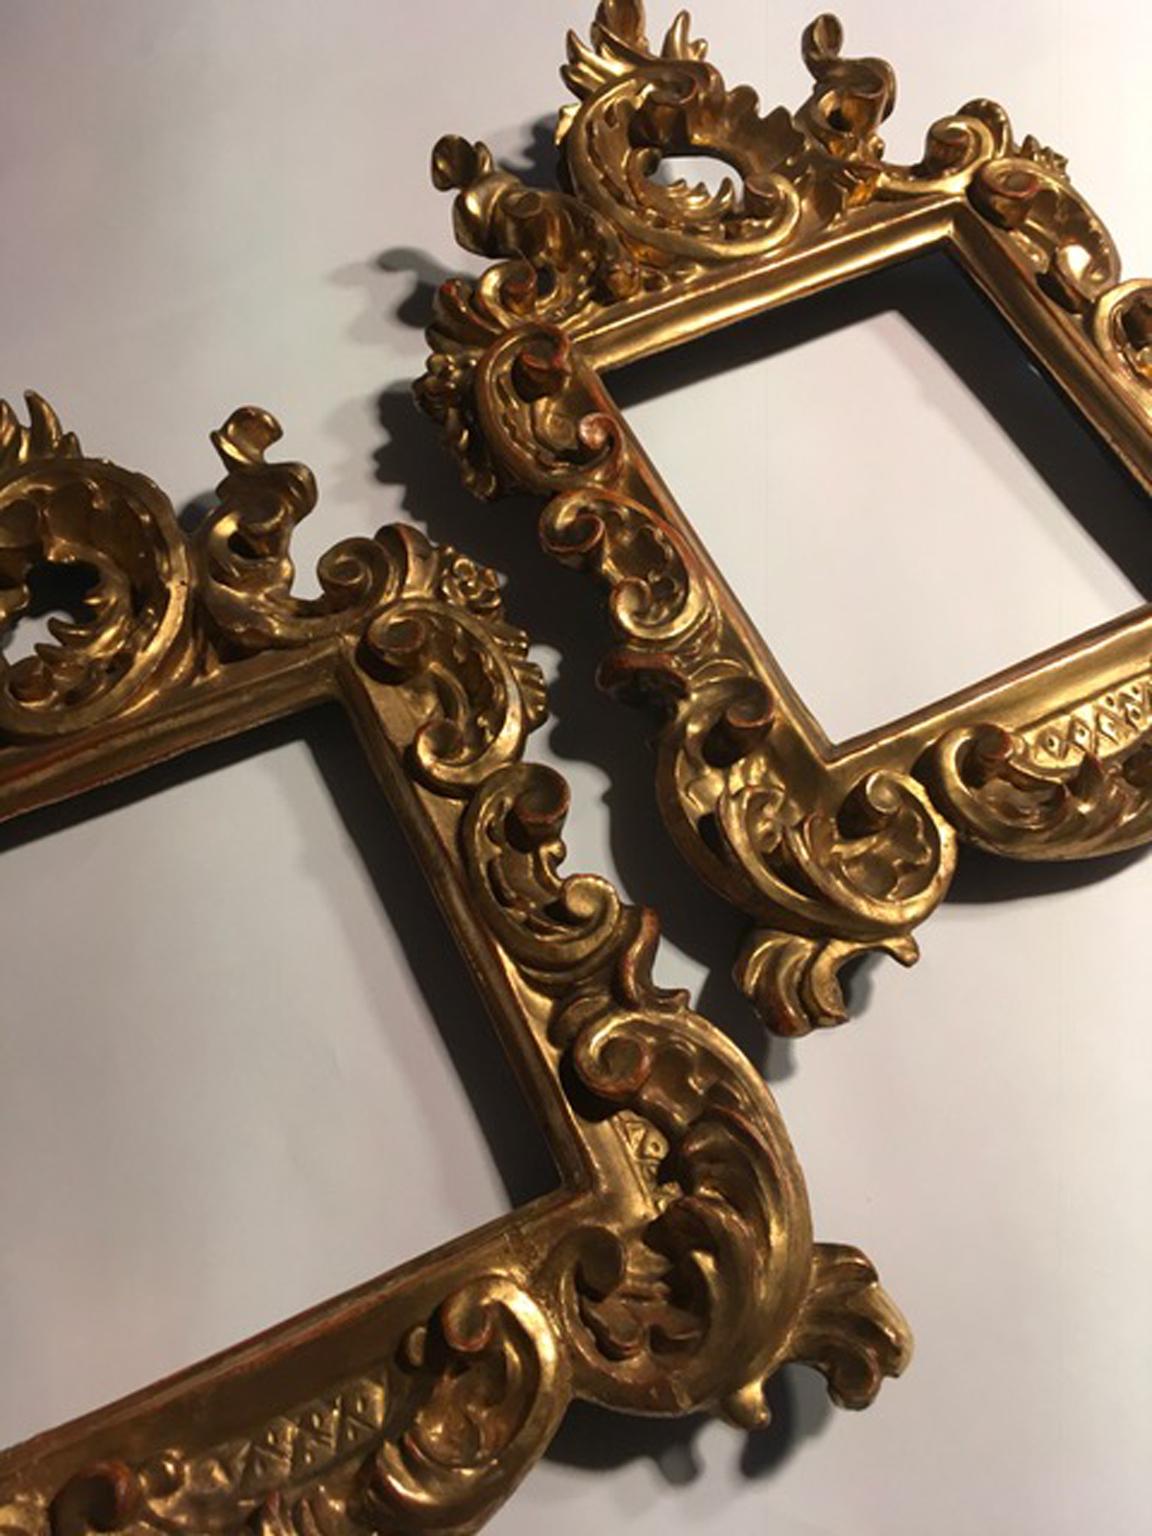 18th century patinated gold hand carved wood pair of frames in Barocco style, Italy

This is a very agreeable and not easy to find pair of frame with right and left decoration, referring to the curls on the top of the frame. 

The back shows the